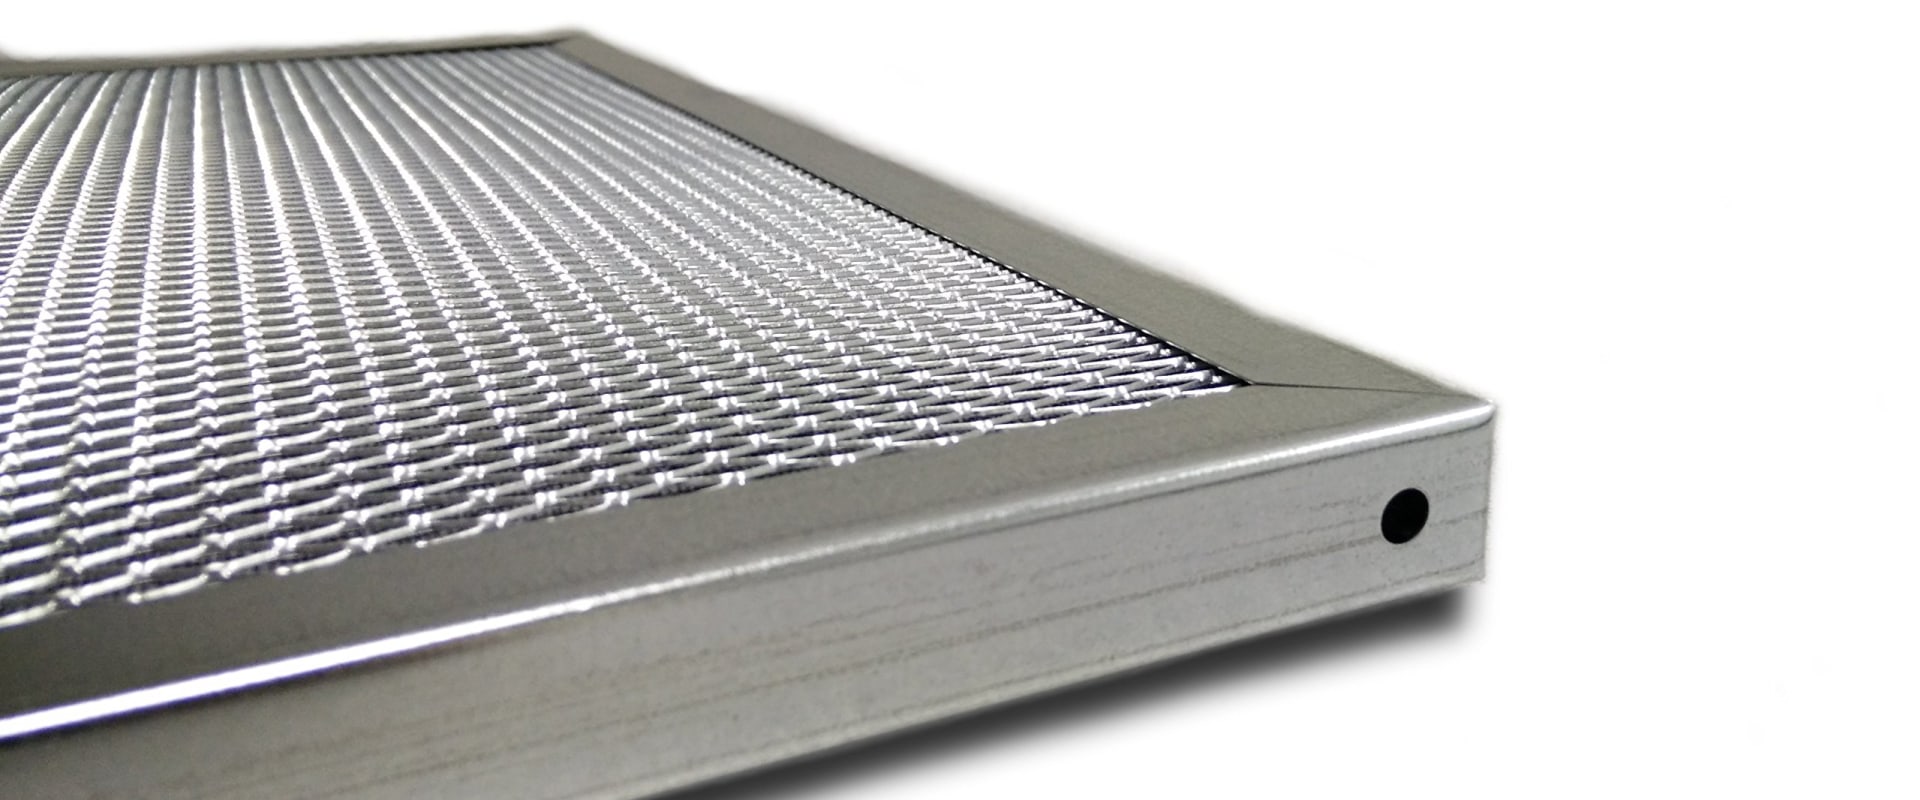 The Pros and Cons of Electrostatic vs Standard 14x18x1 Air Filters